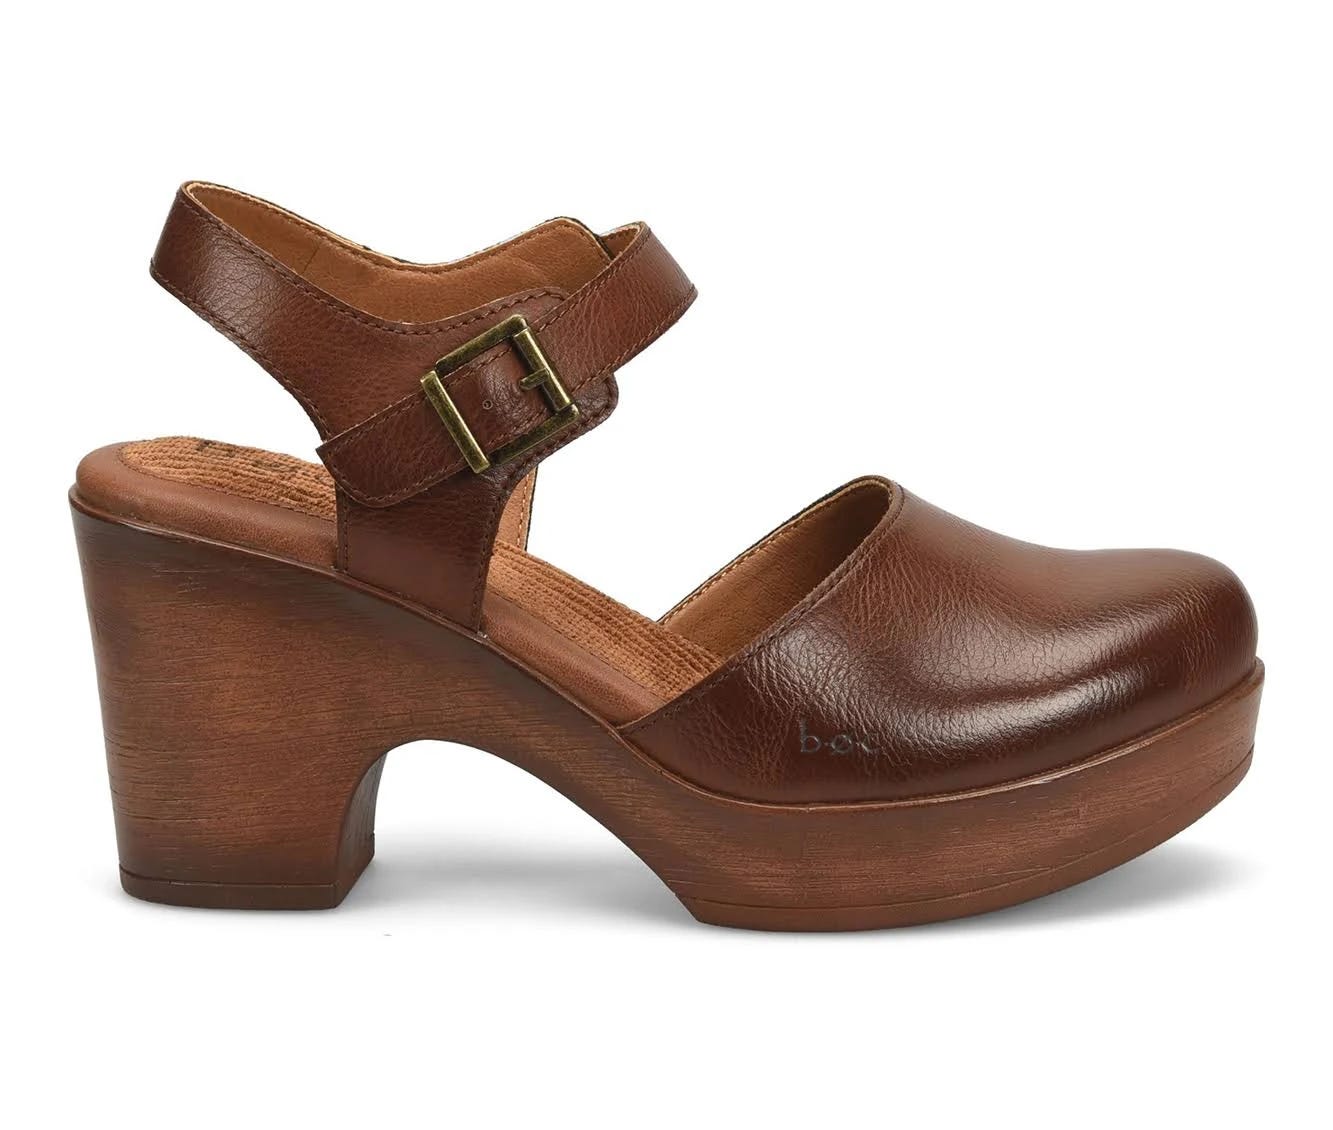 Brown Polyurethane Mary Jane Wedges with Adjustable Strap | Image